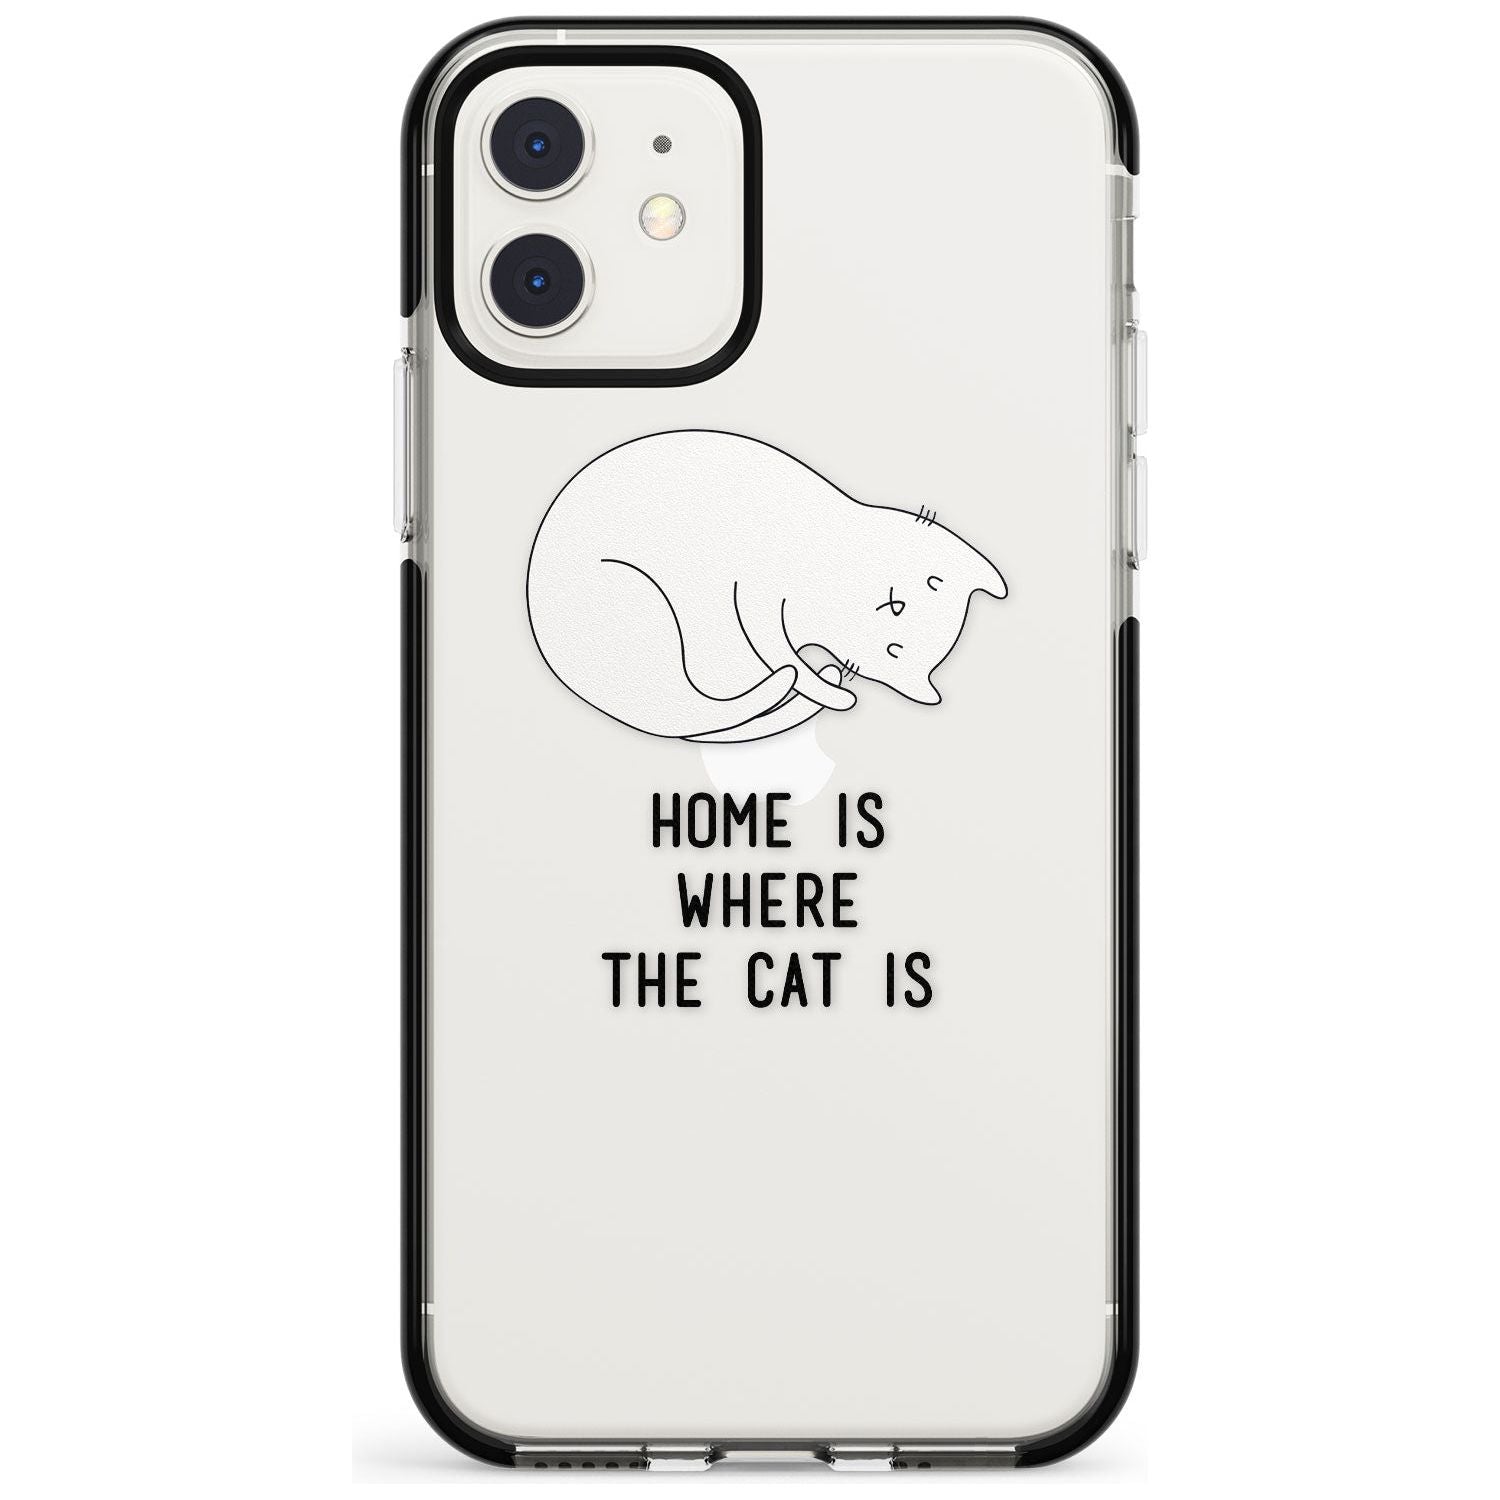 Home Is Where the Cat is Pink Fade Impact Phone Case for iPhone 11 Pro Max